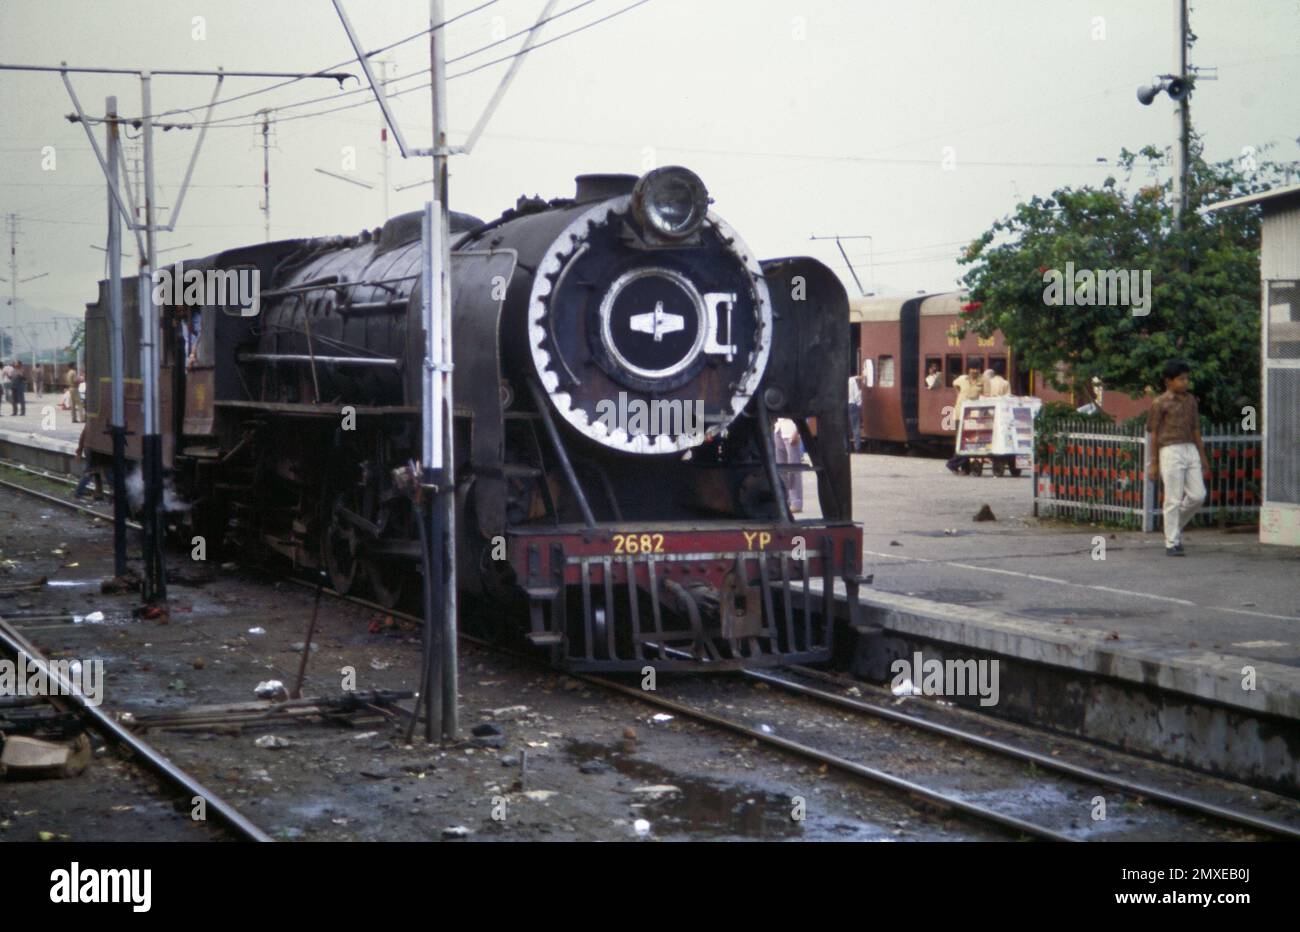 Historic, Archive Image Of A 1949 Baldwin Designed Metre Gauge 4-6-2 Passenger Steam Train, Locomotive Class YP Number 2682 Sitting On The Tracks At Jodhpur Station, India 1990 Stock Photo